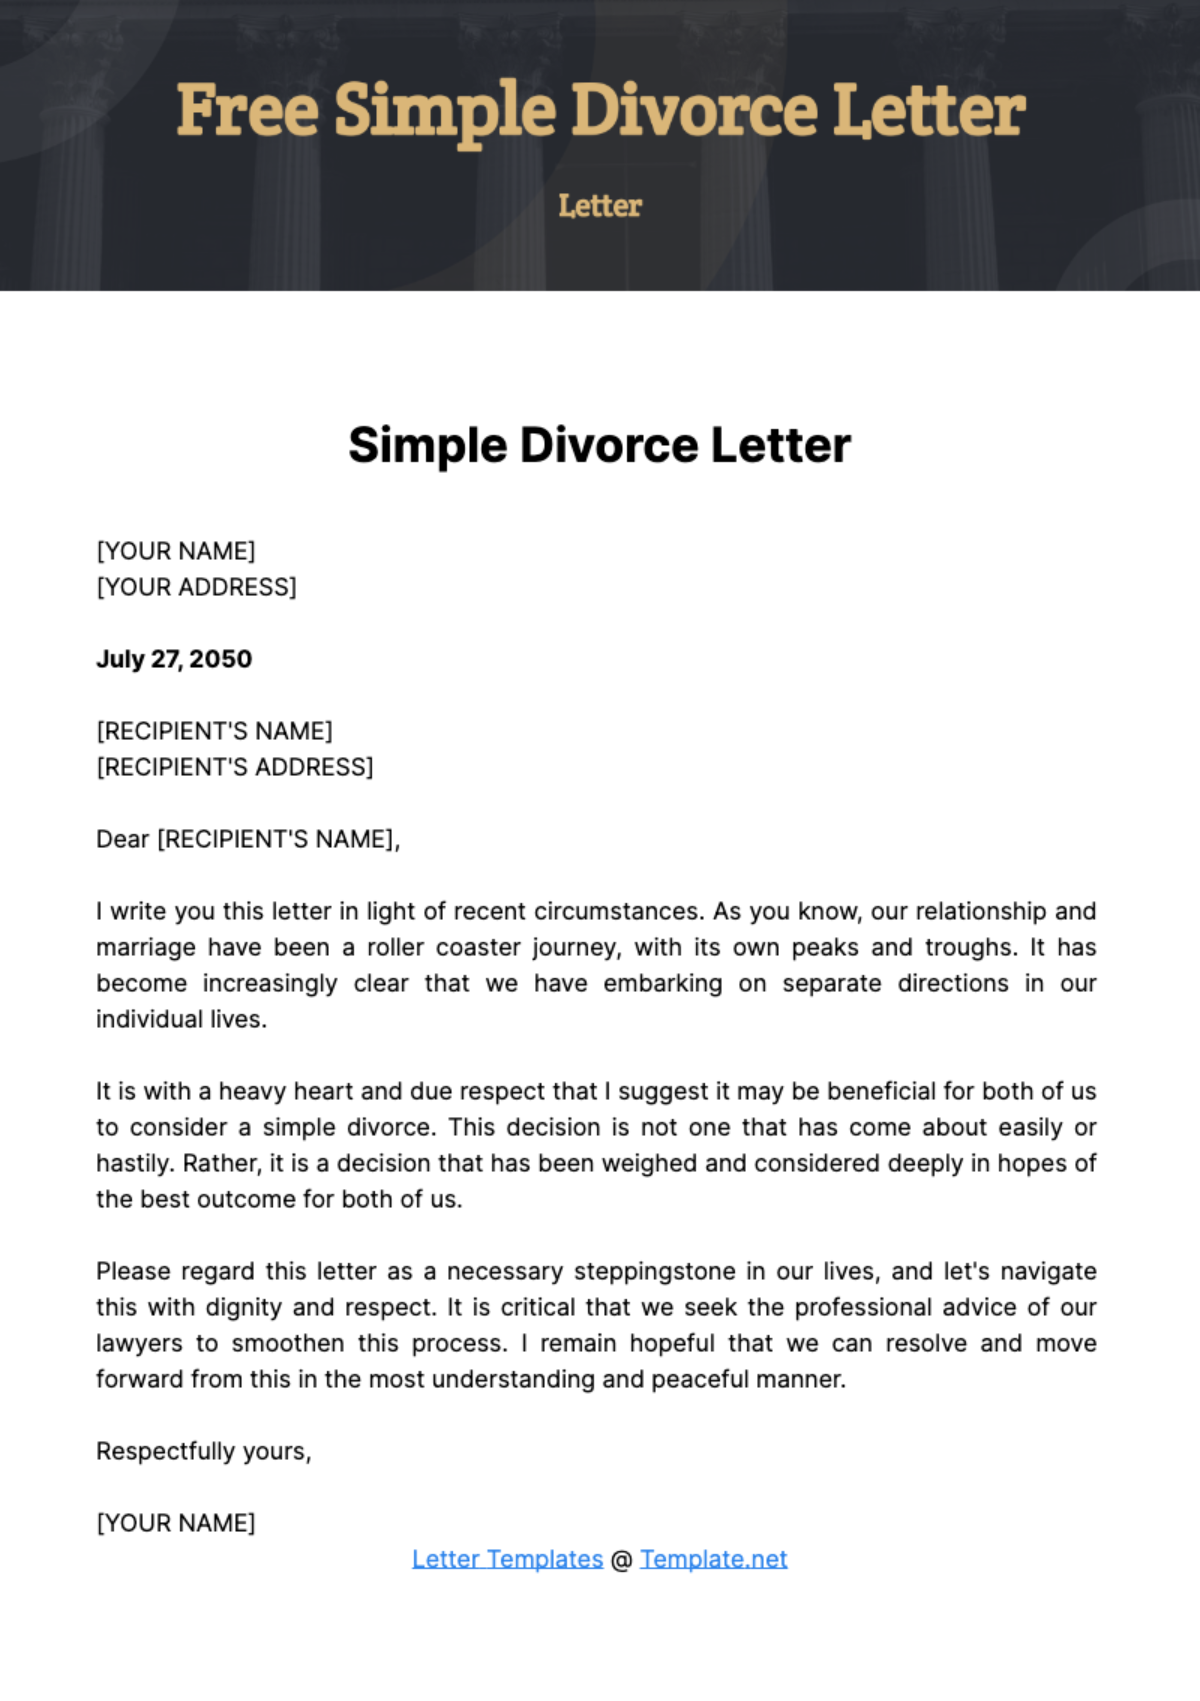 Free Simple Divorce Letter Template